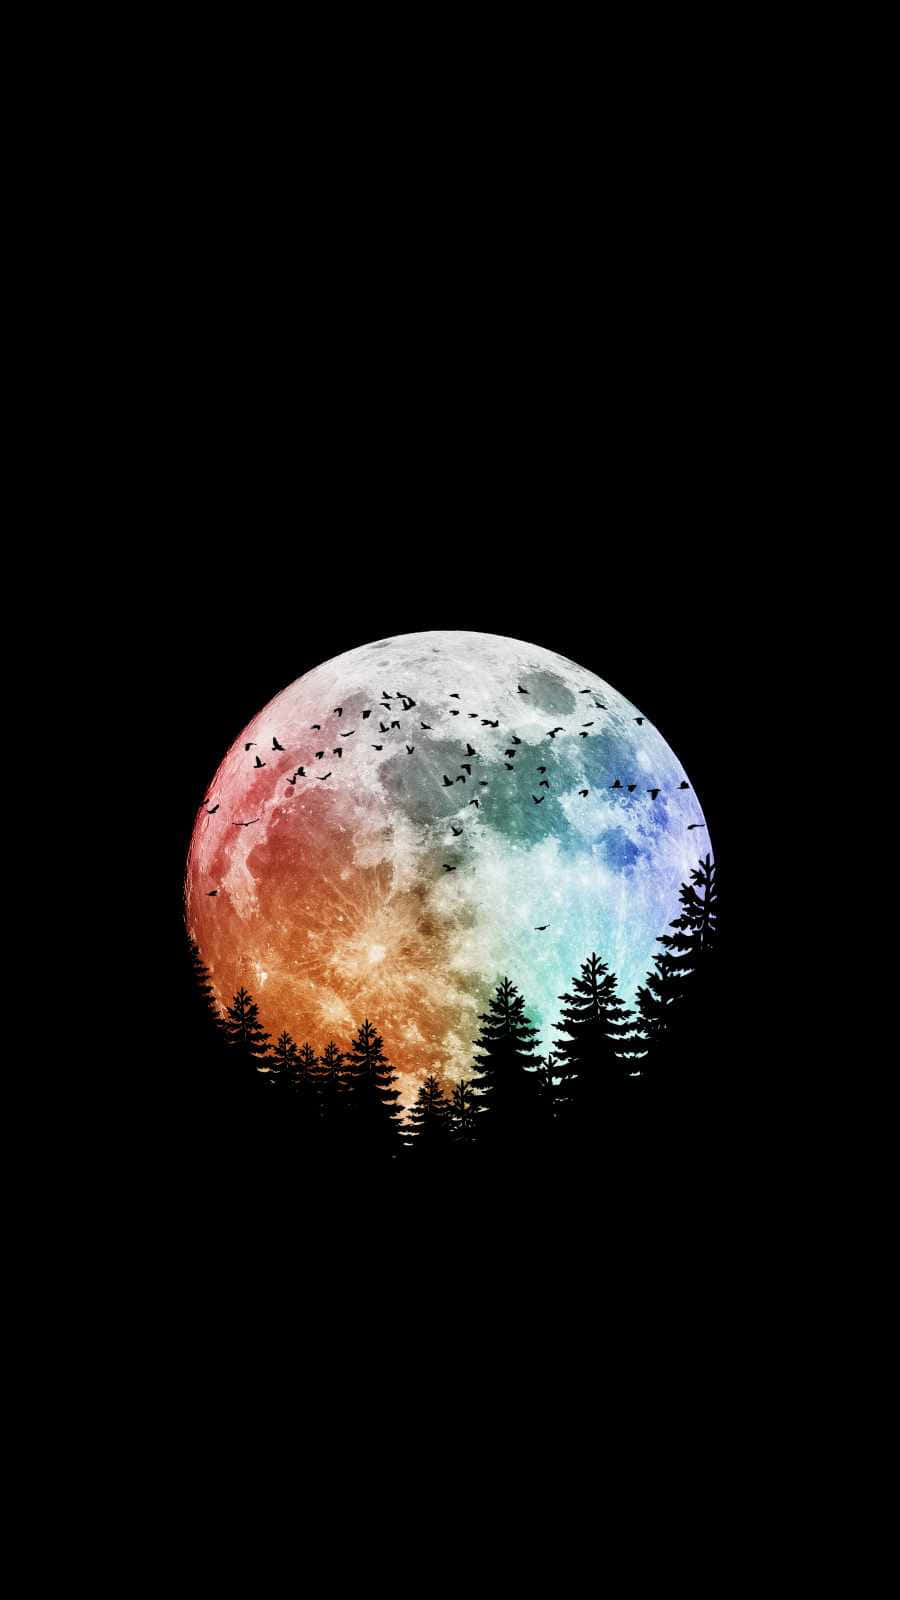 Enjoy a moonlit evening with your iPhone Wallpaper